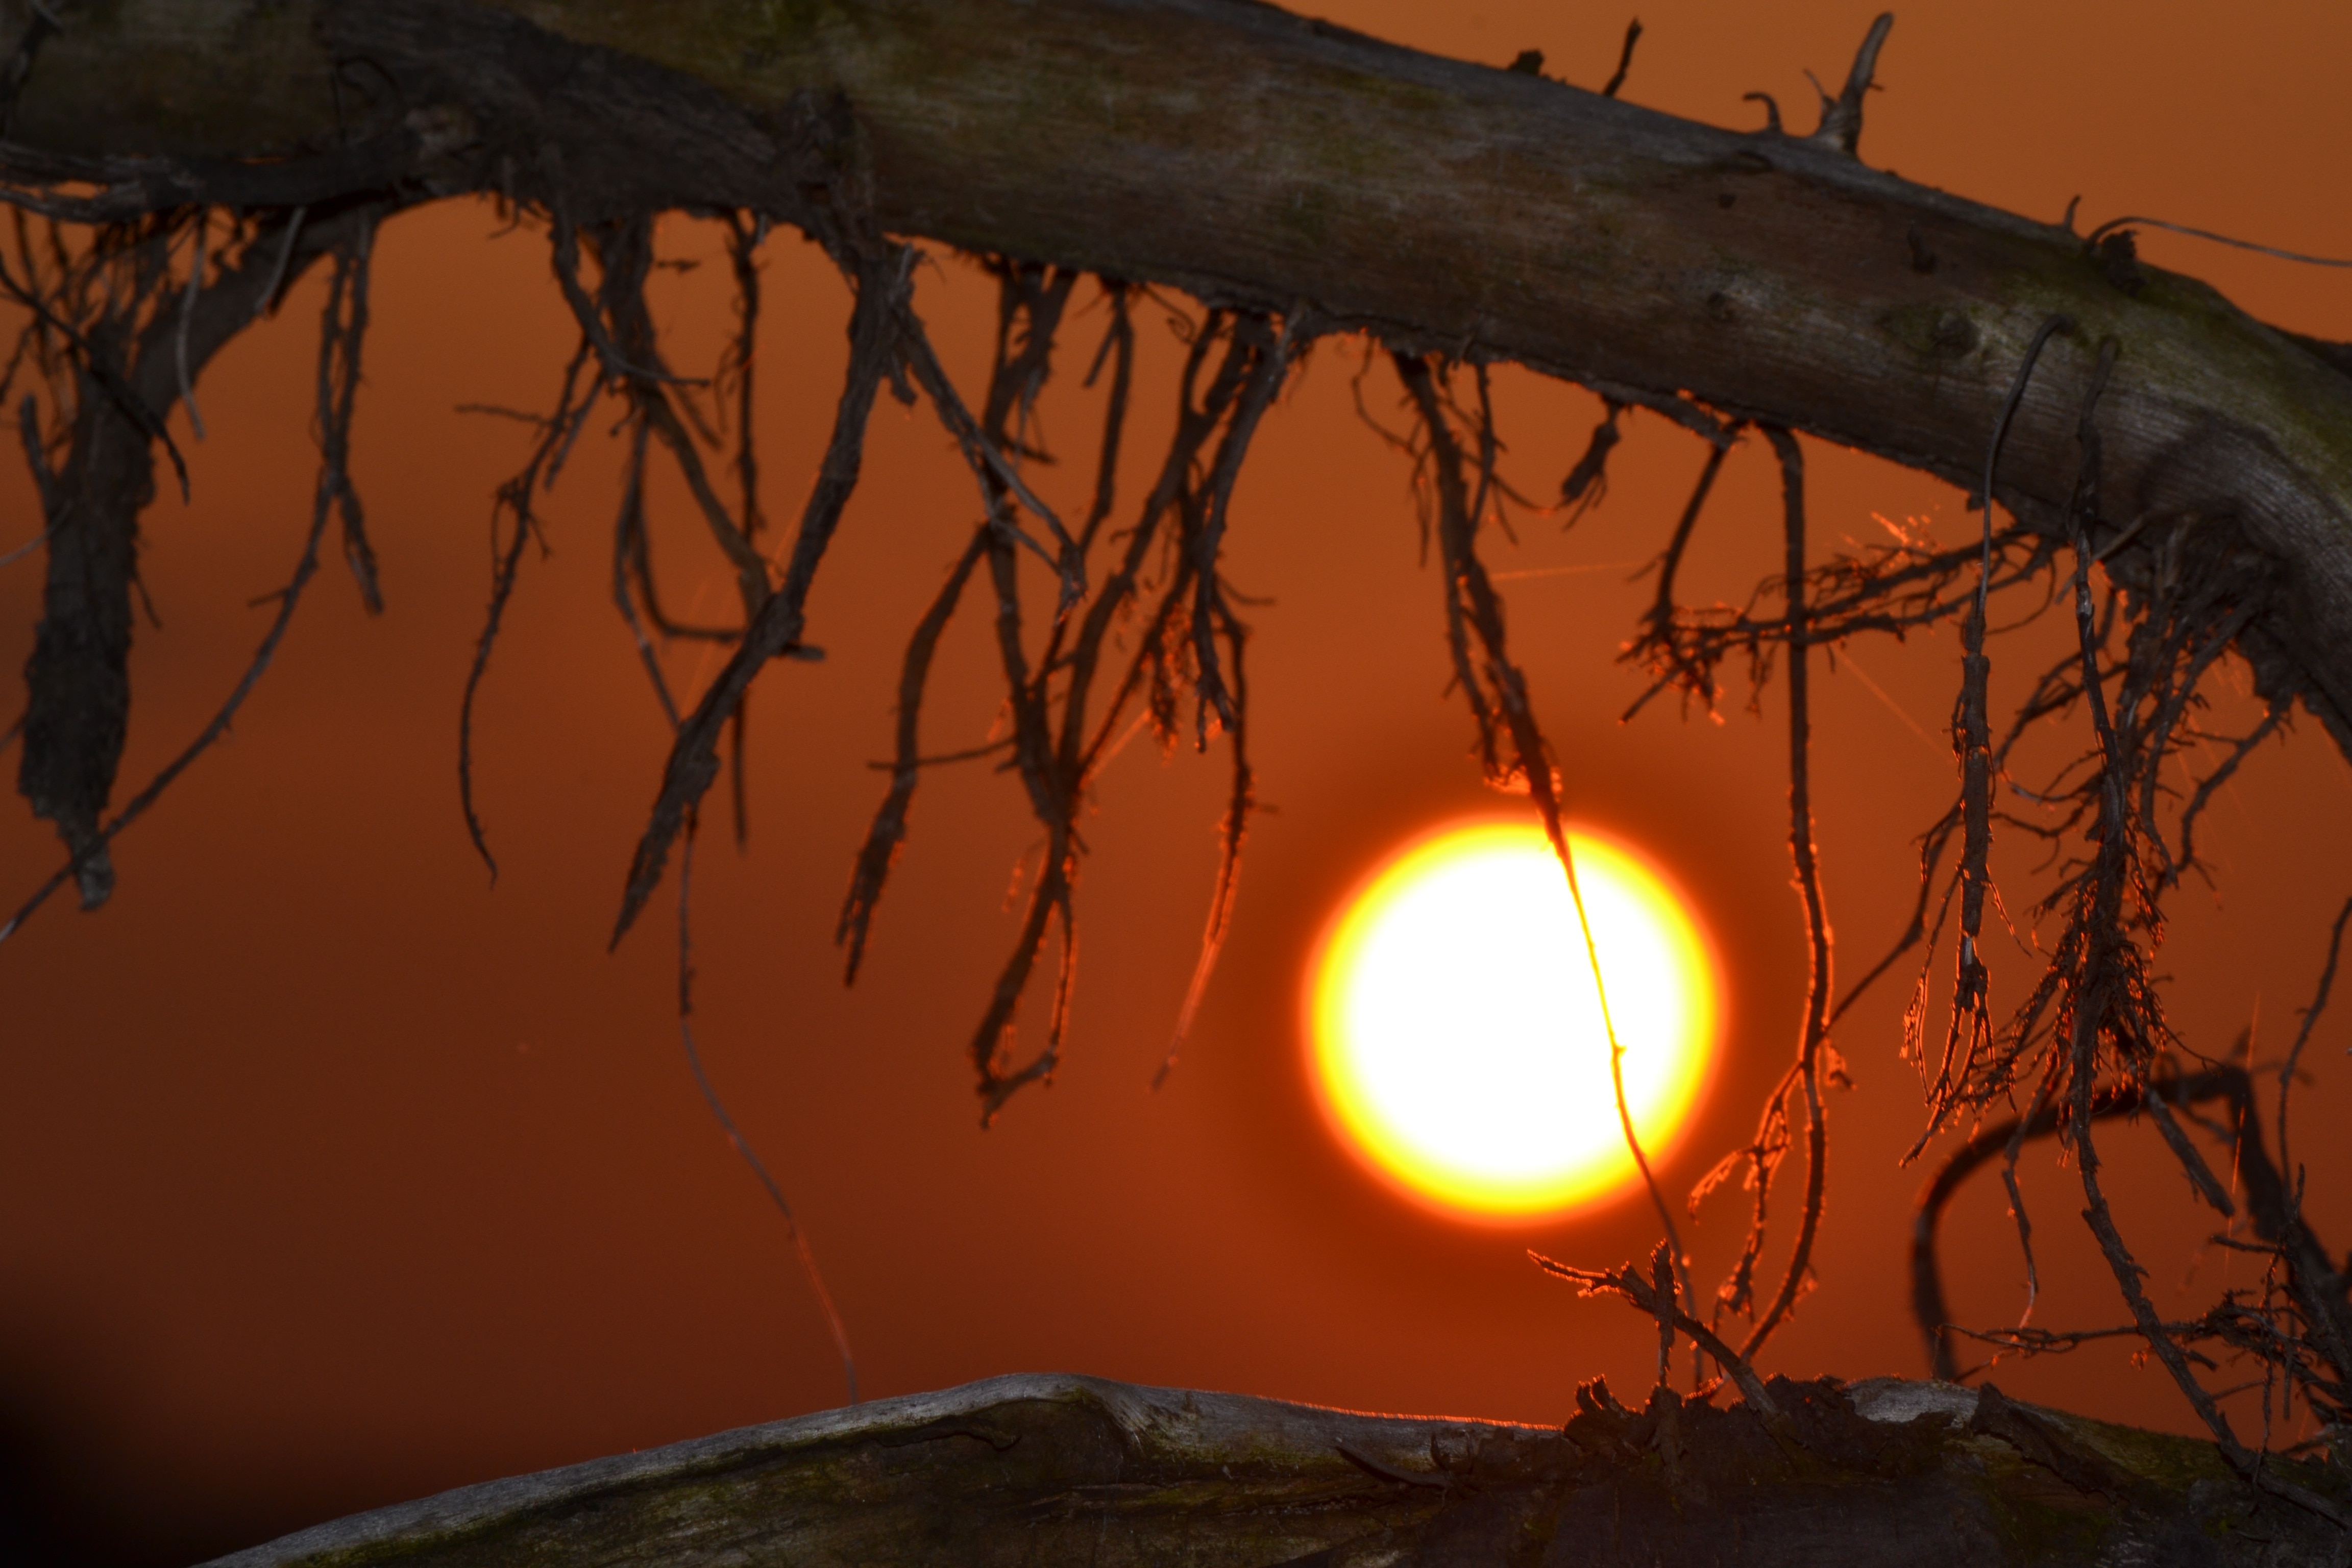 brown tree trunk with vines under orange cloudy sky during sunset